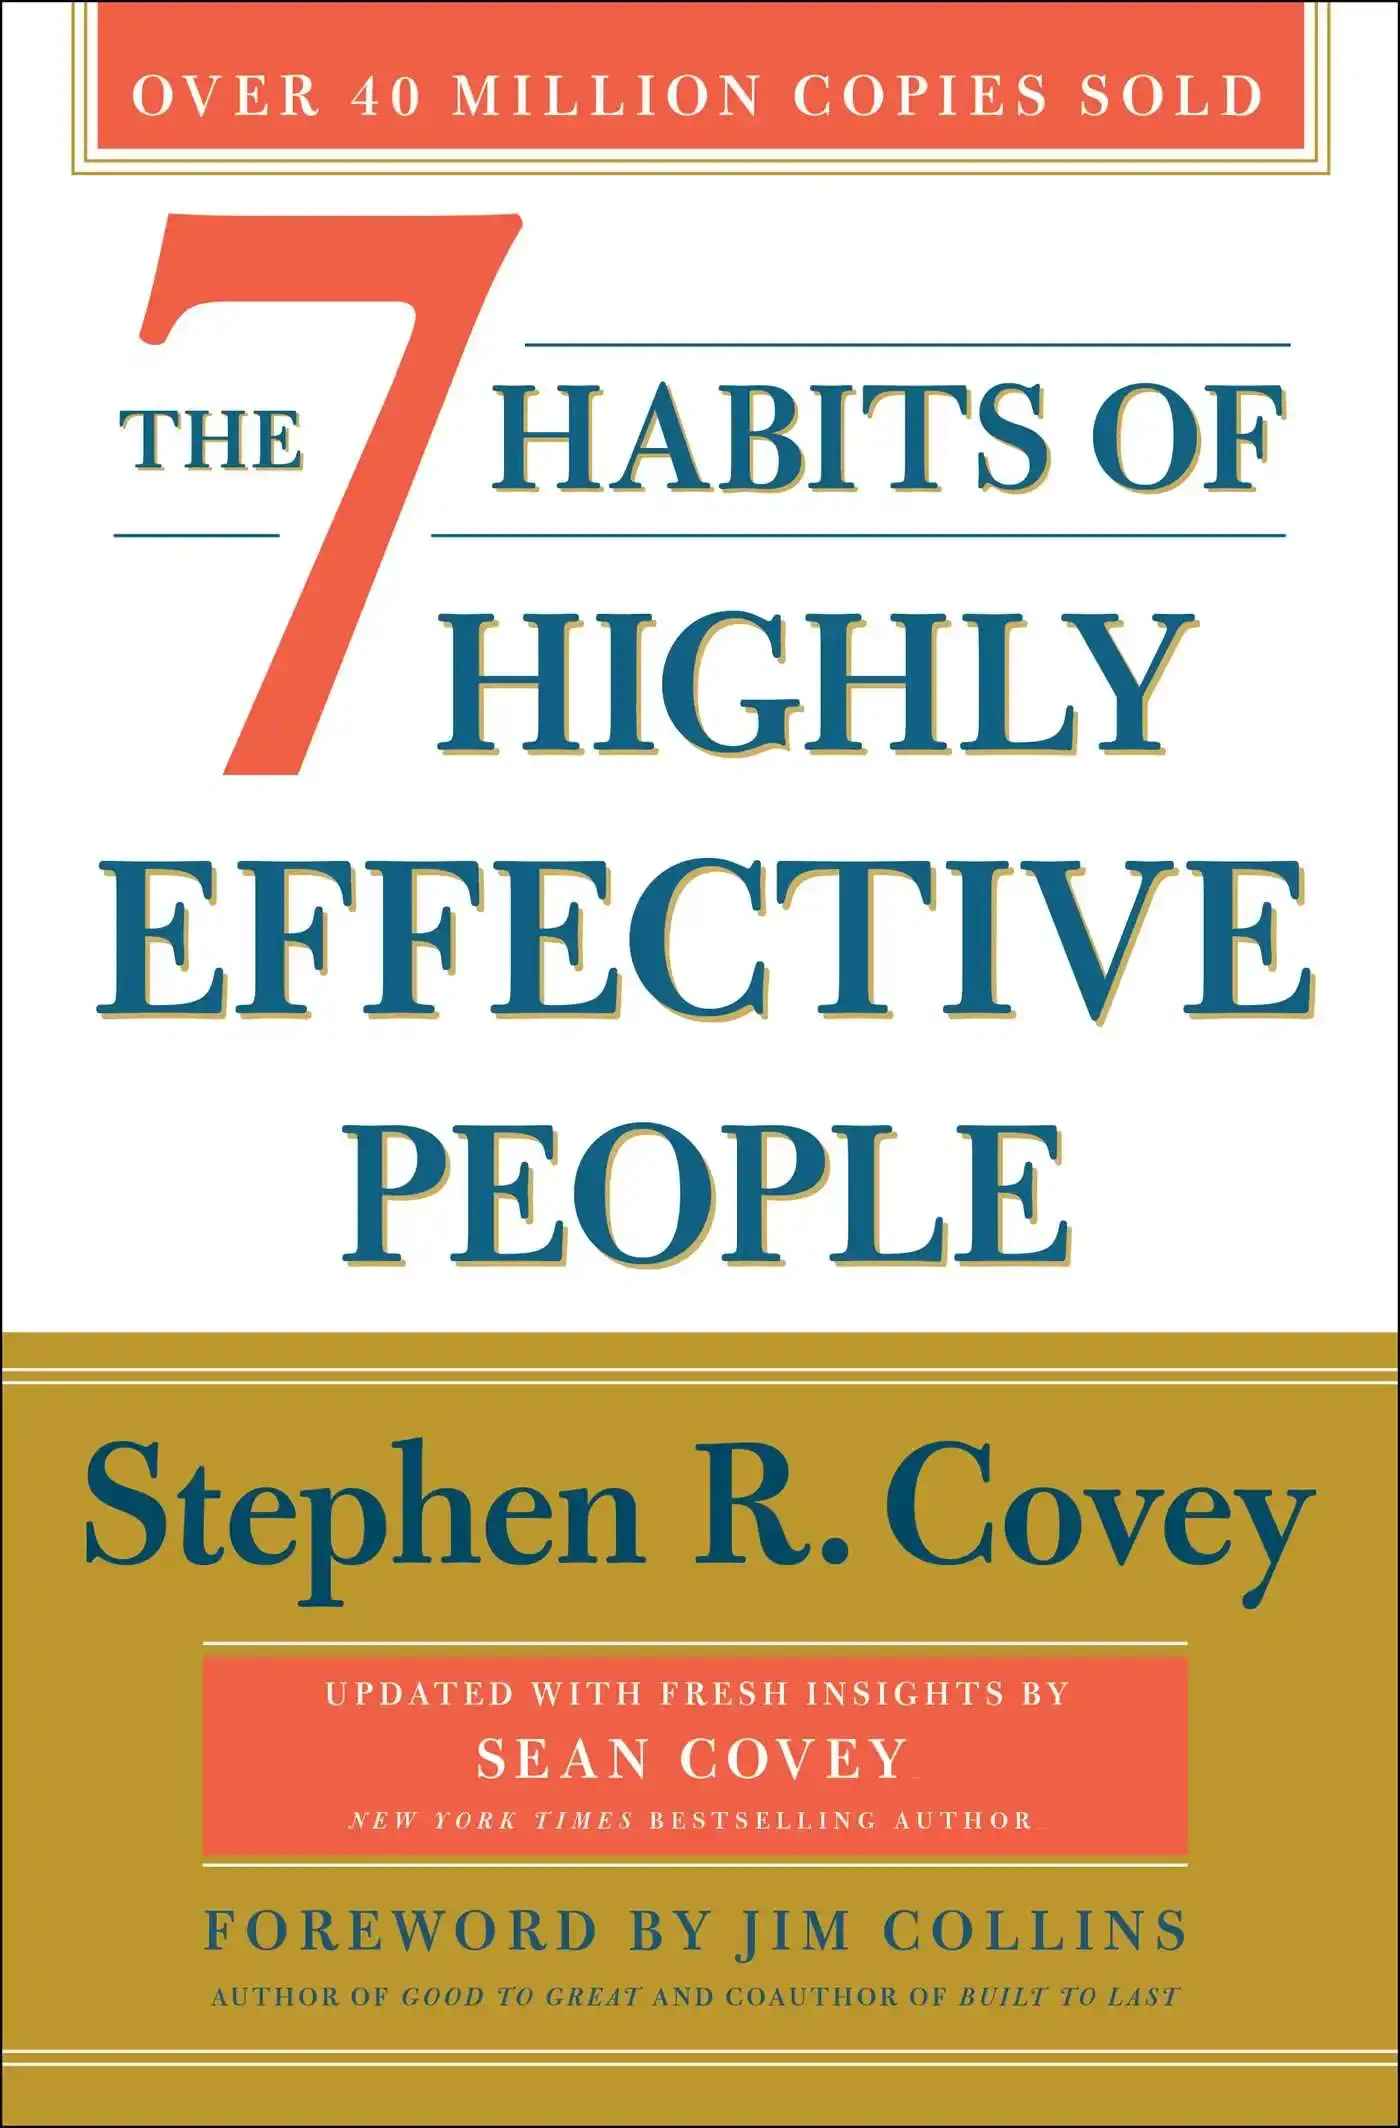 The 7 Habits of Highly Effective People by Stephen R. Covey, Self Motivation Books Best Sellers